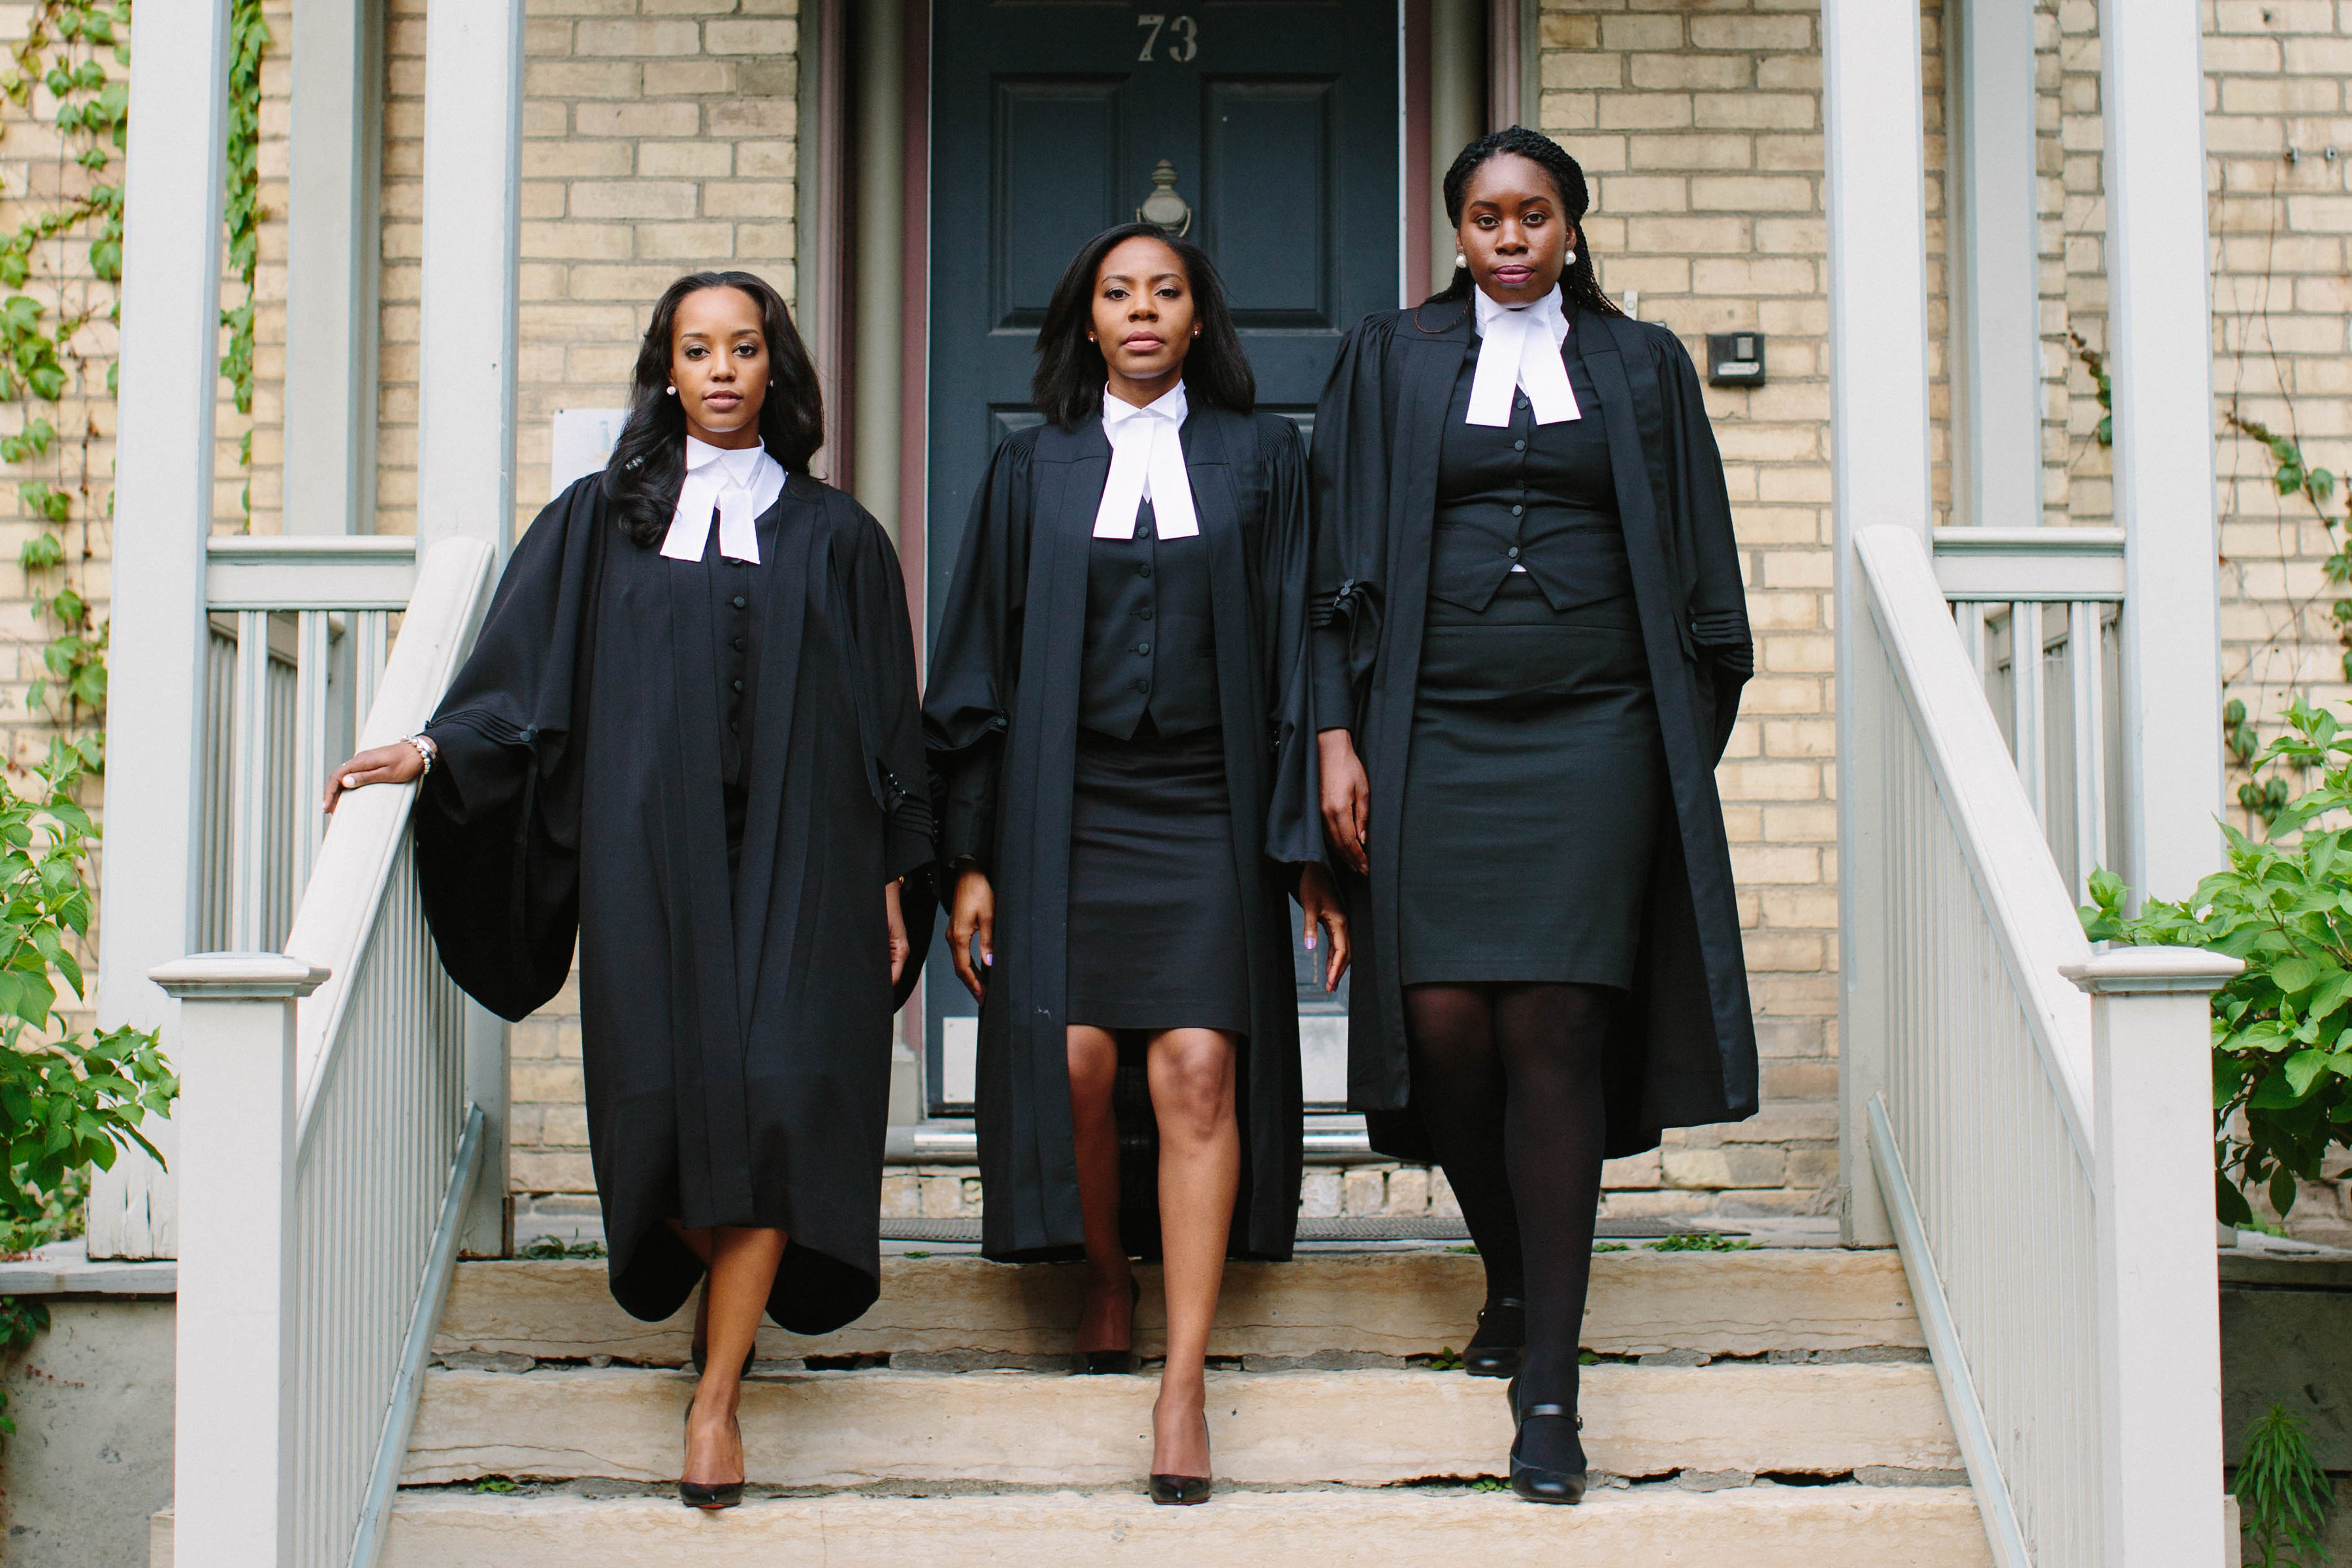 3 female jd grads in lawyers robes